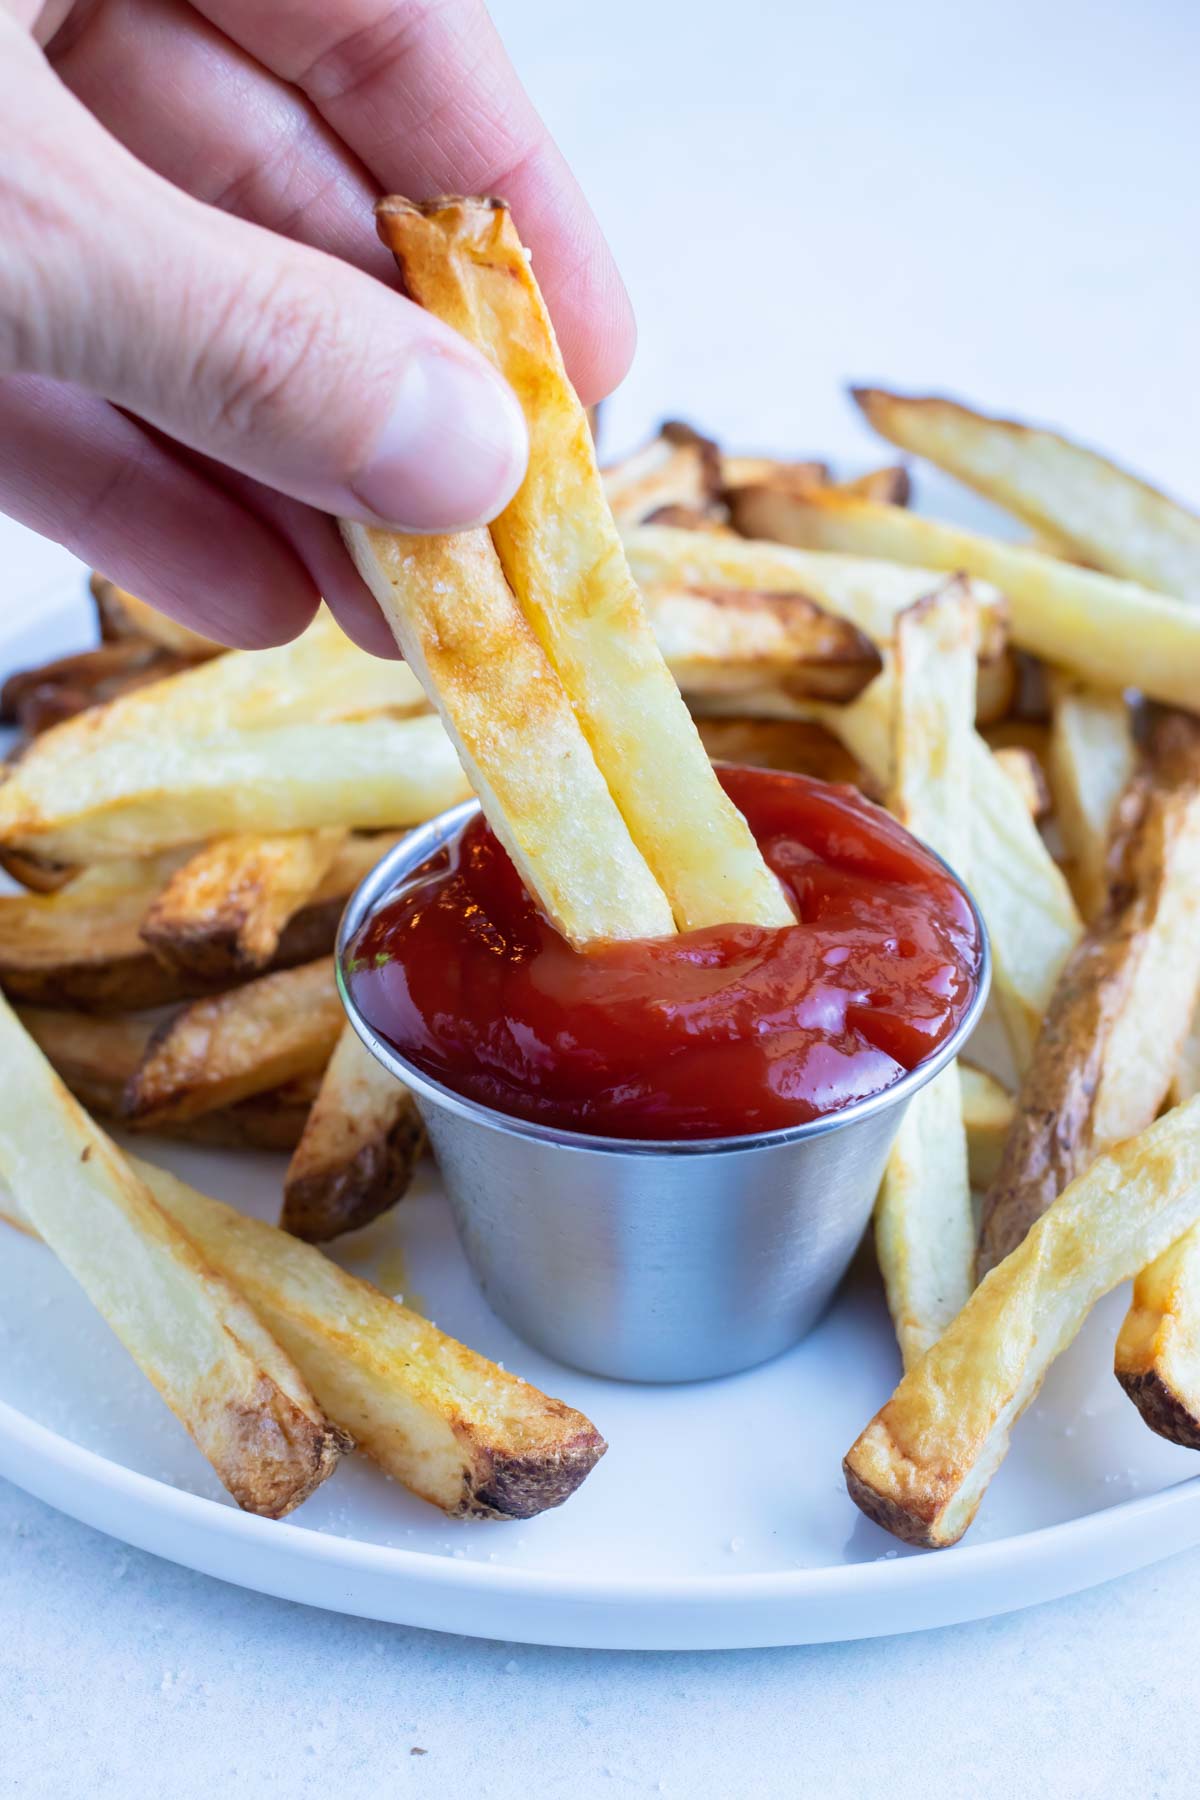 French fries are dipped in ketchup.